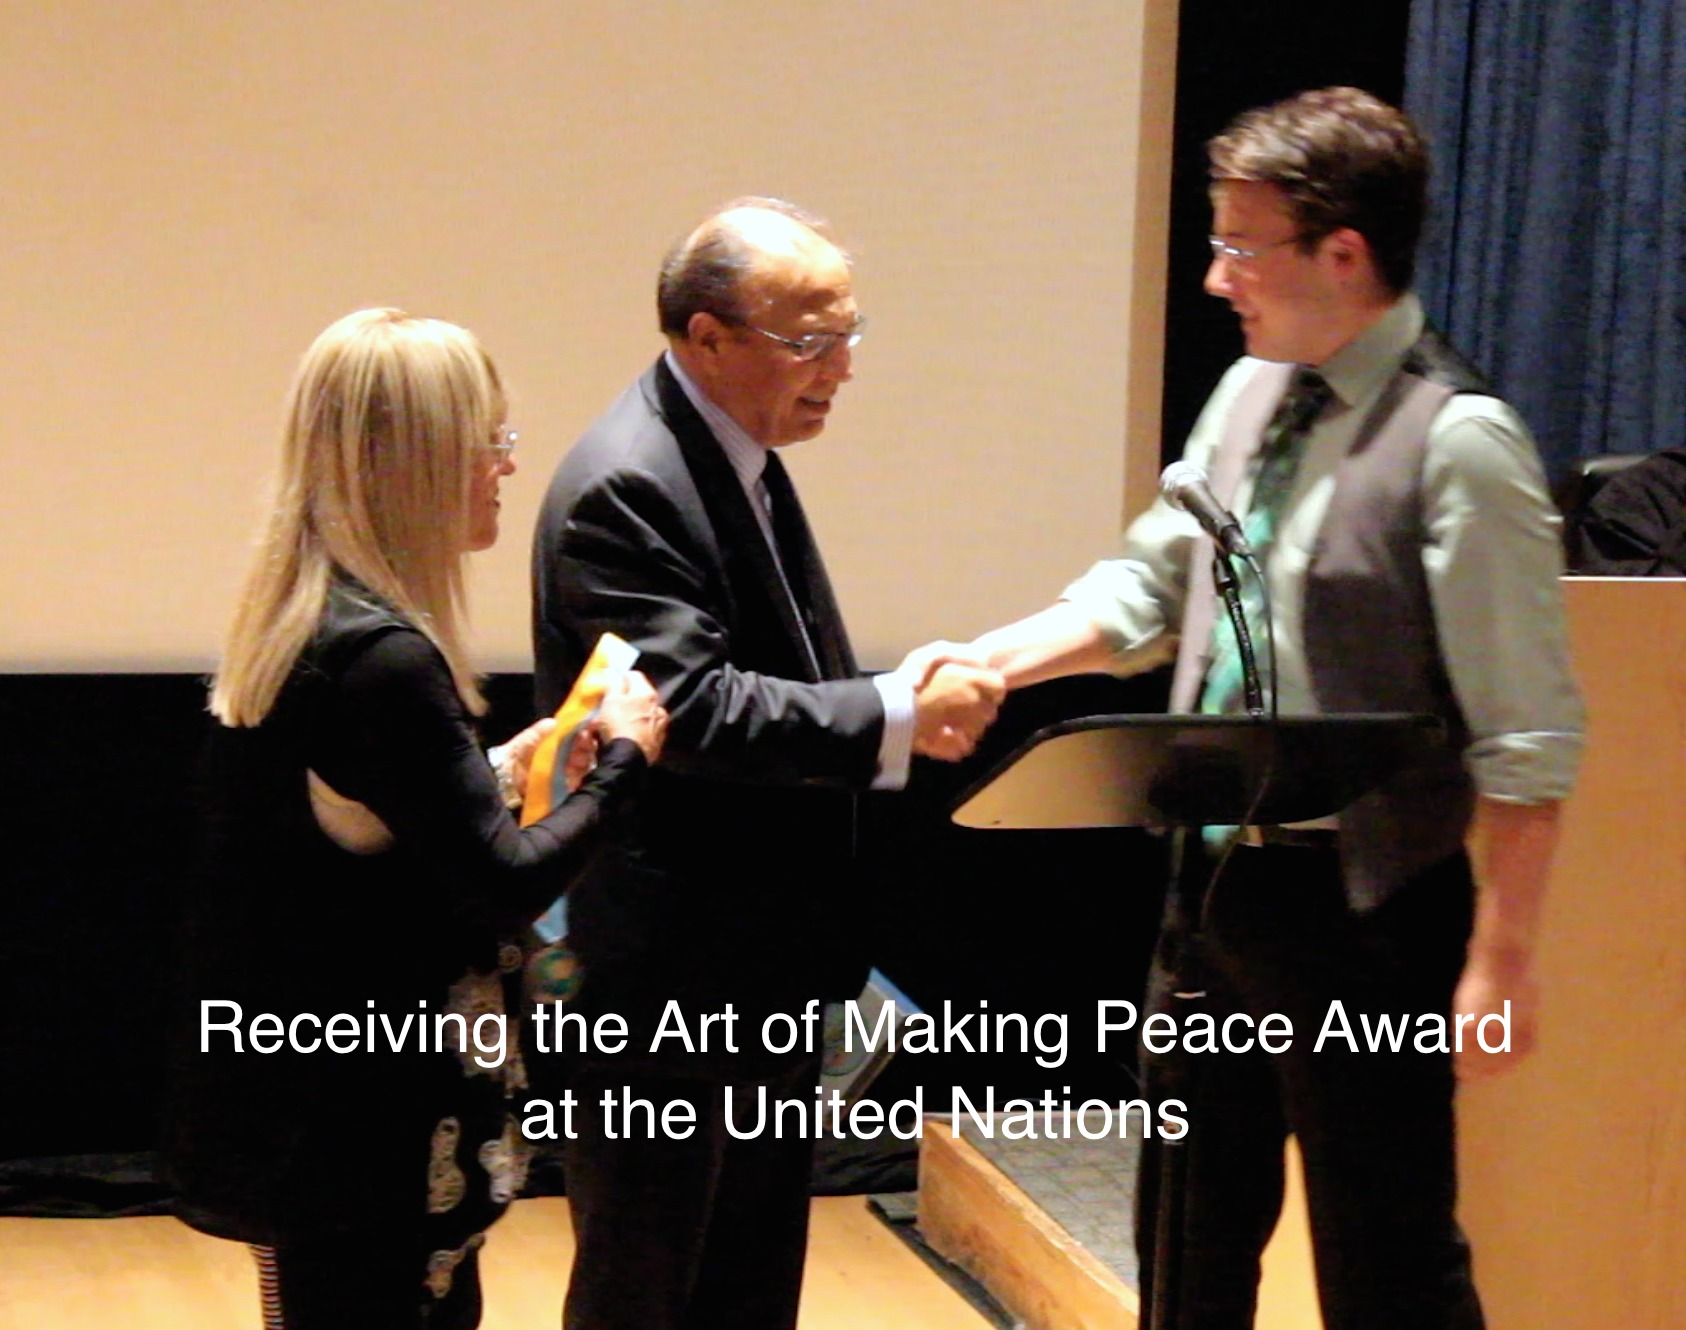 Receiving The Art of Making Peace Award from Ambassador Anruwal Chowdhury at the United Nations 2014. Matthew received this award for his film 